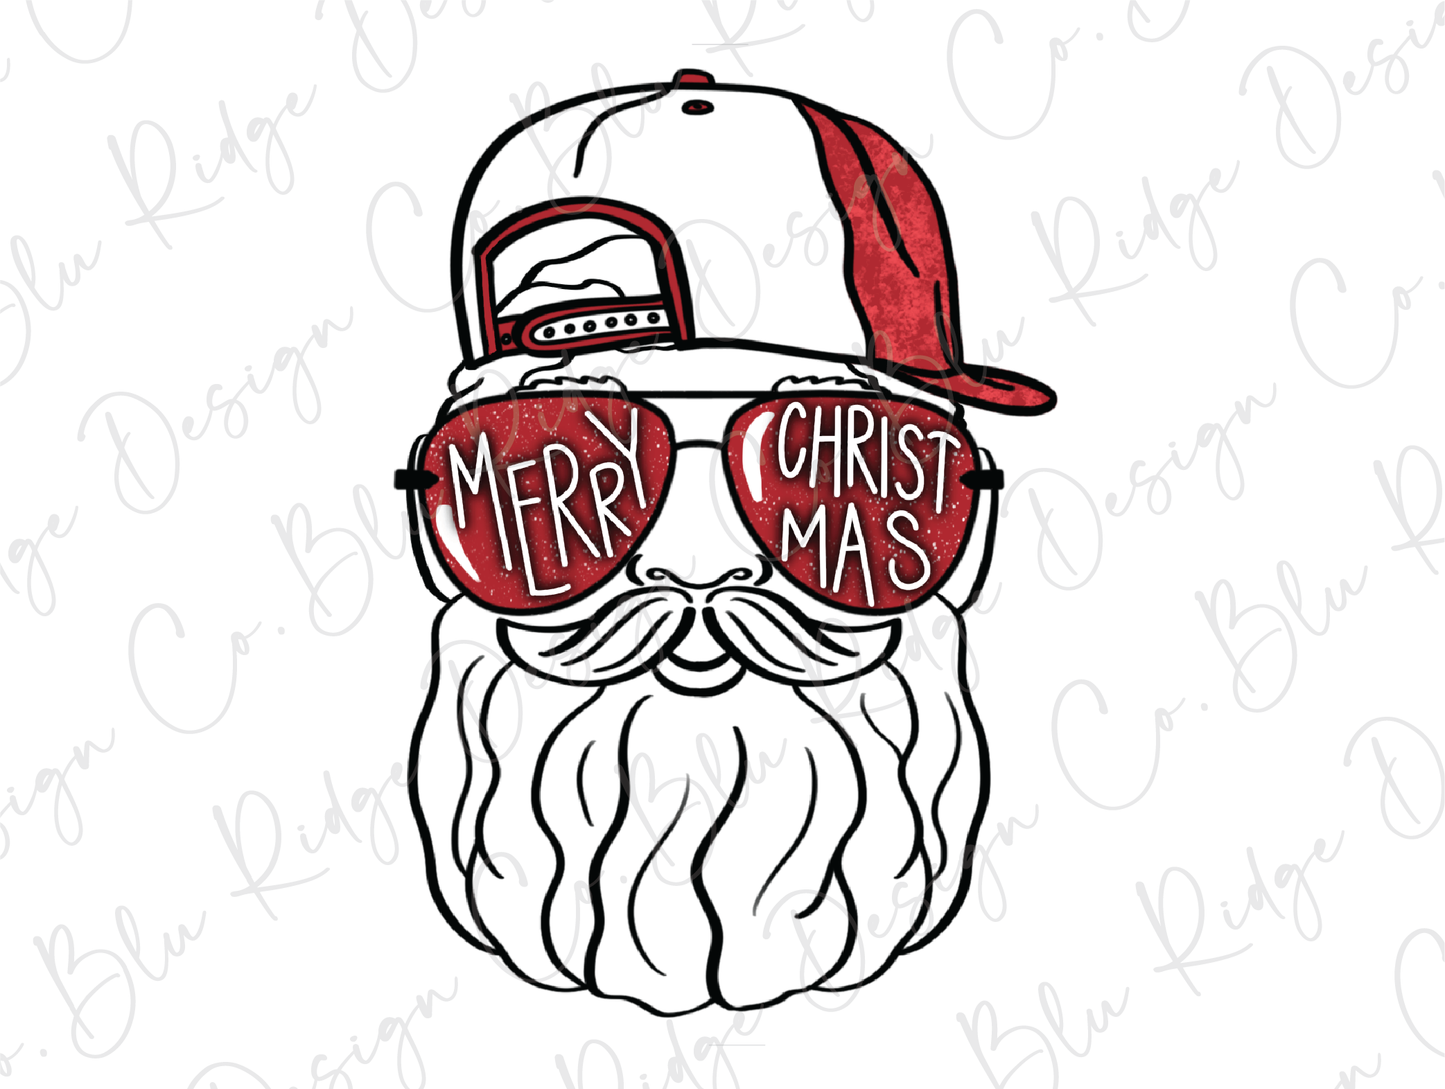 Cool Santa Merry Christmas Sunglasses Direct to Film (DTF) Transfer